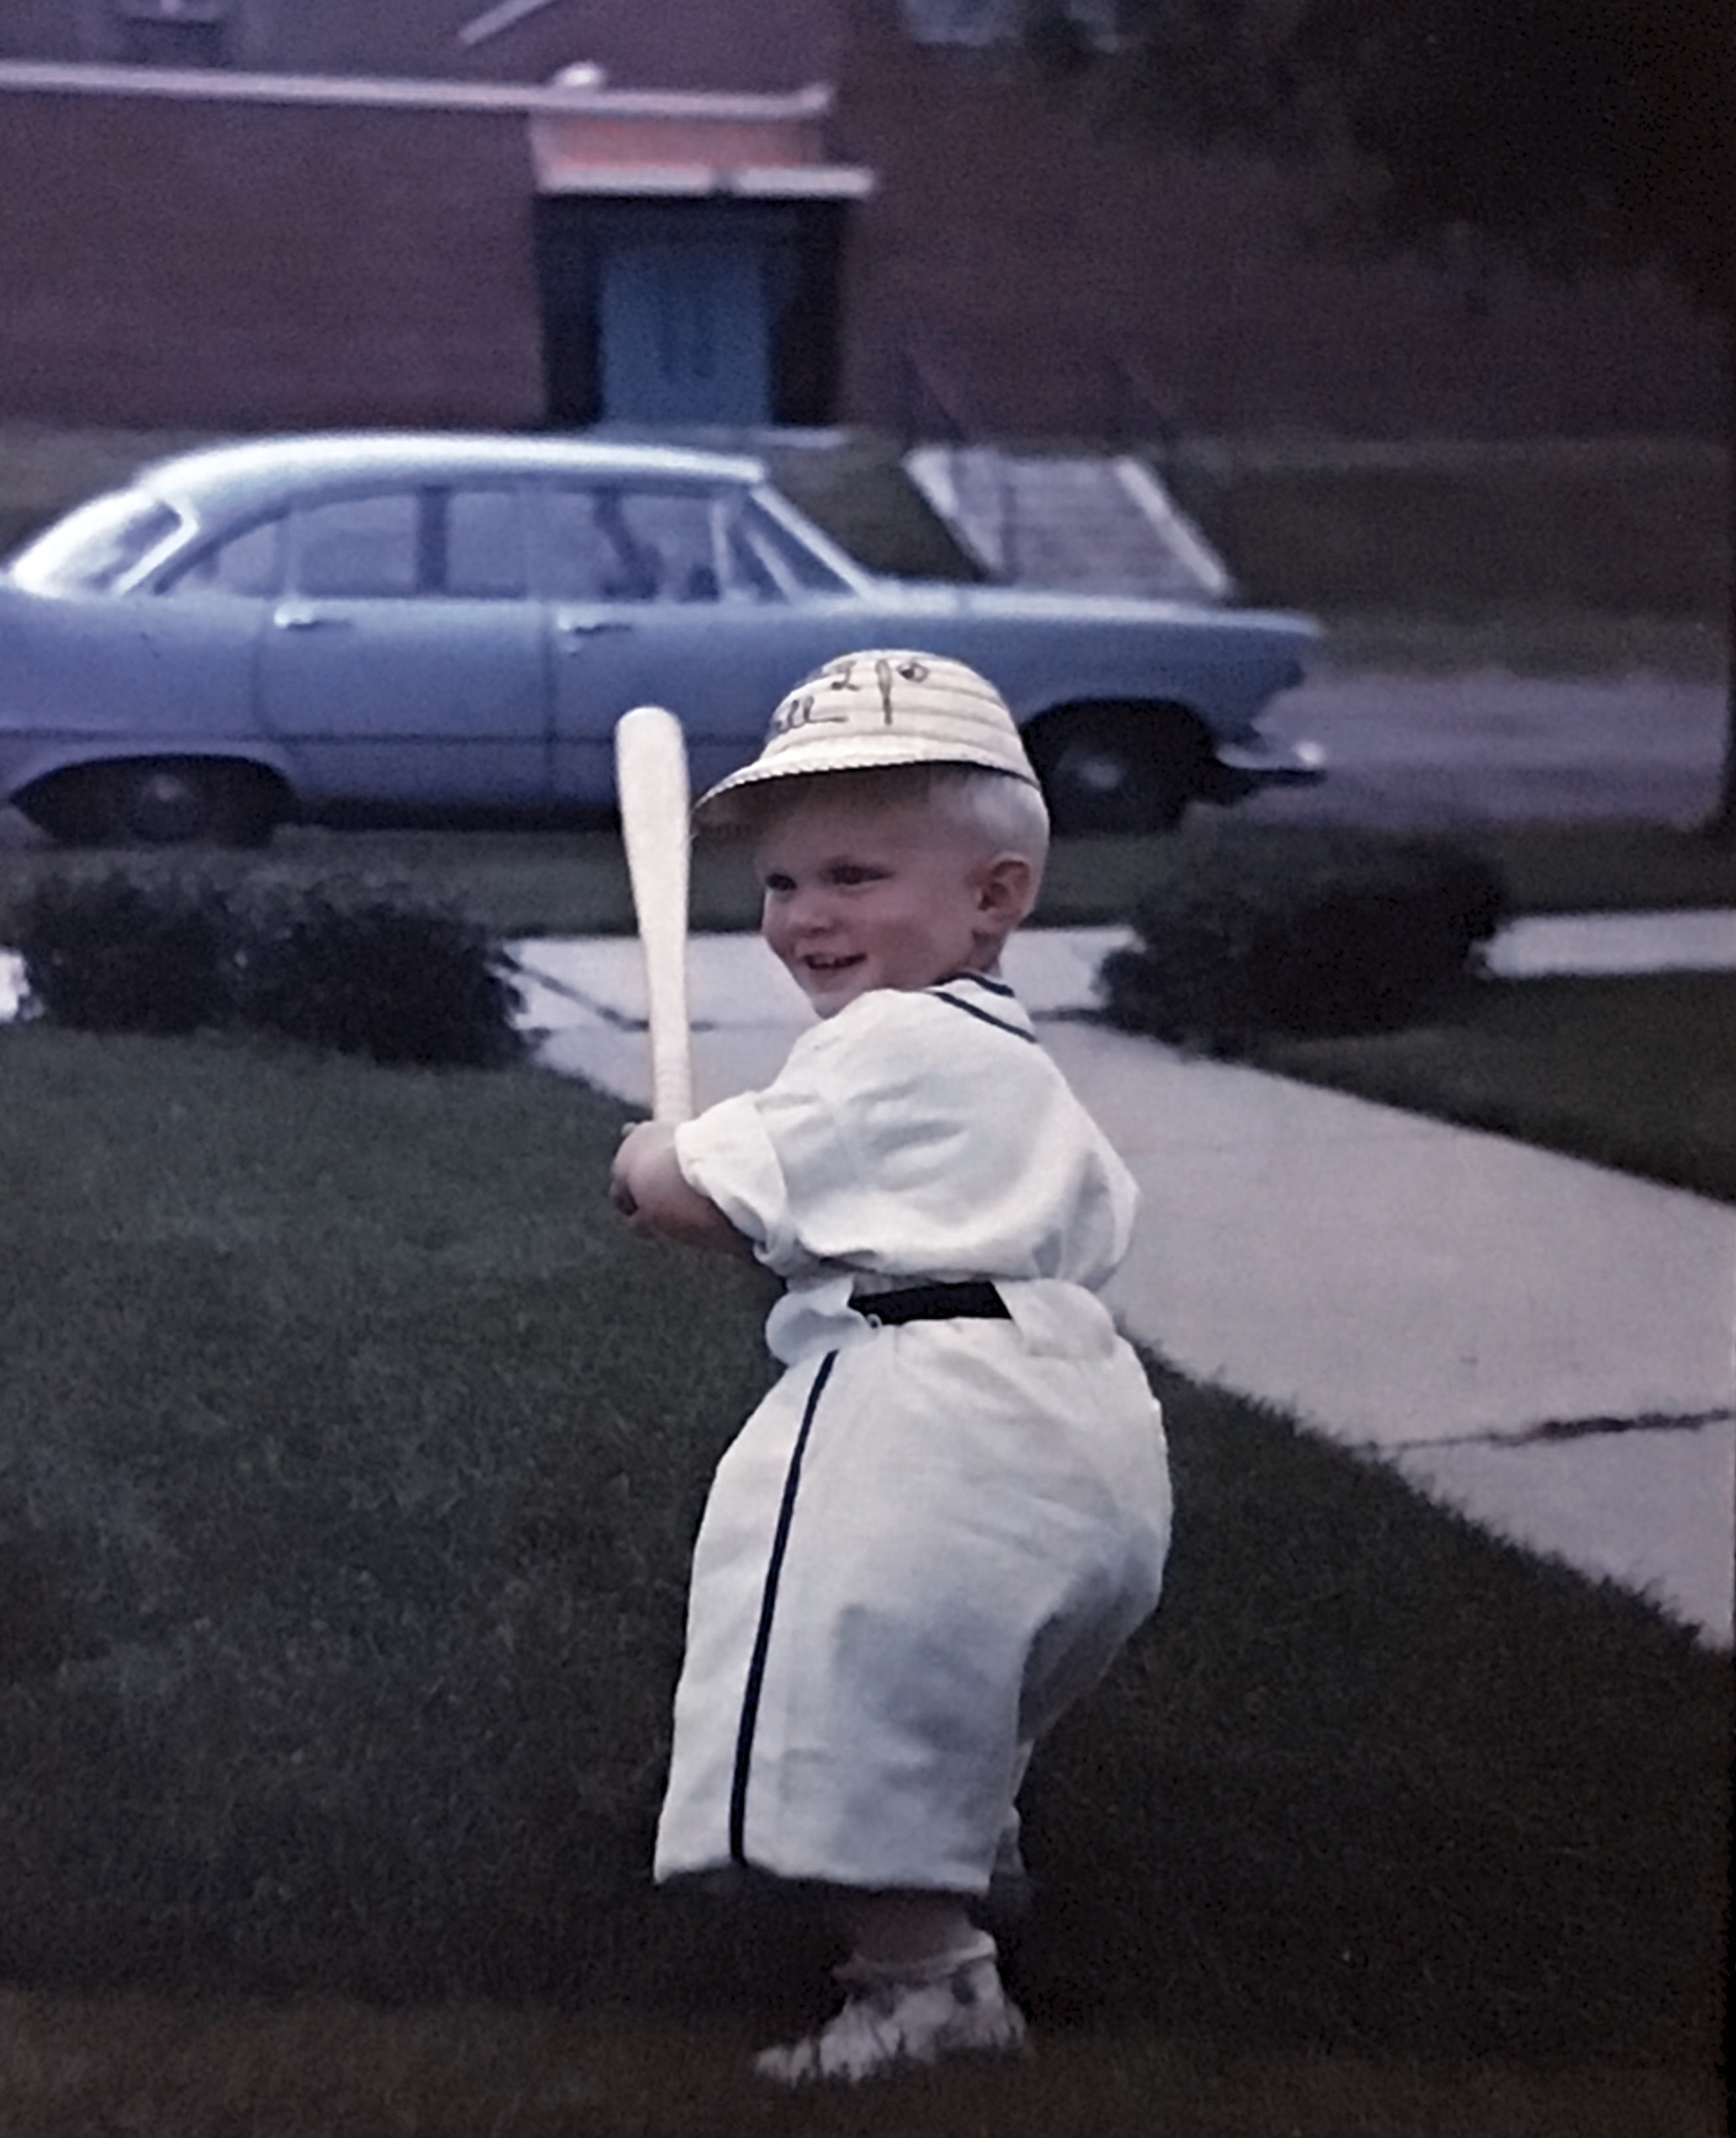 My younger brother in his baseball unform at 18 months old in 1962.